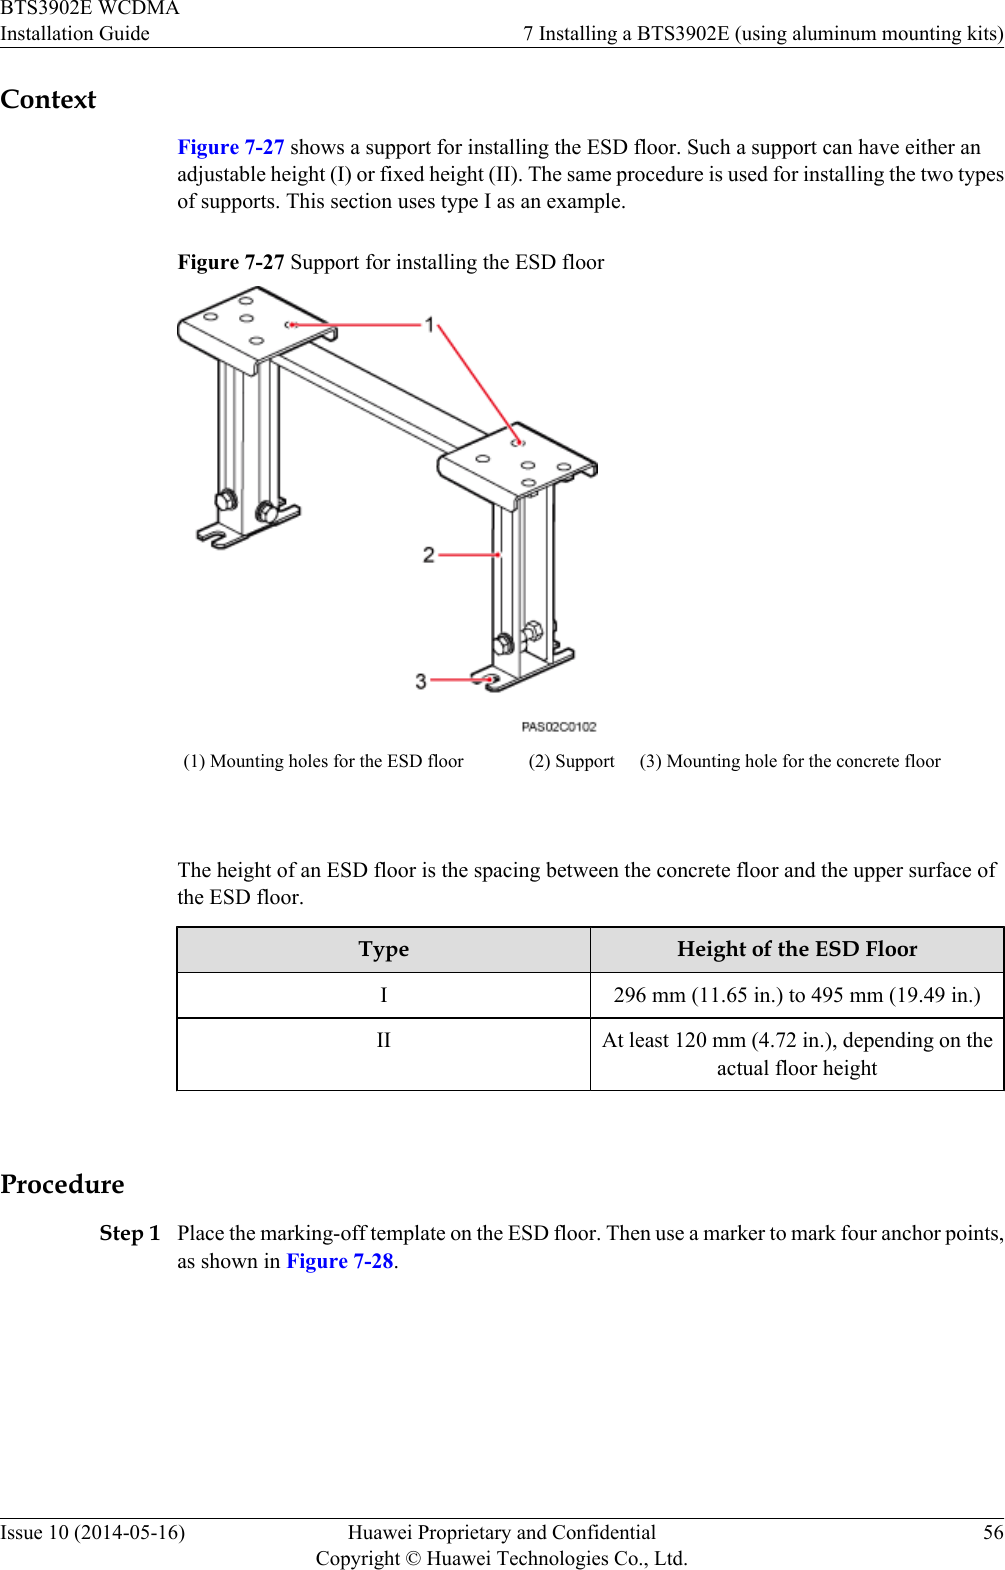 ContextFigure 7-27 shows a support for installing the ESD floor. Such a support can have either anadjustable height (I) or fixed height (II). The same procedure is used for installing the two typesof supports. This section uses type I as an example.Figure 7-27 Support for installing the ESD floor(1) Mounting holes for the ESD floor (2) Support (3) Mounting hole for the concrete floor The height of an ESD floor is the spacing between the concrete floor and the upper surface ofthe ESD floor.Type Height of the ESD FloorI296 mm (11.65 in.) to 495 mm (19.49 in.)II At least 120 mm (4.72 in.), depending on theactual floor height ProcedureStep 1 Place the marking-off template on the ESD floor. Then use a marker to mark four anchor points,as shown in Figure 7-28.BTS3902E WCDMAInstallation Guide 7 Installing a BTS3902E (using aluminum mounting kits)Issue 10 (2014-05-16) Huawei Proprietary and ConfidentialCopyright © Huawei Technologies Co., Ltd.56